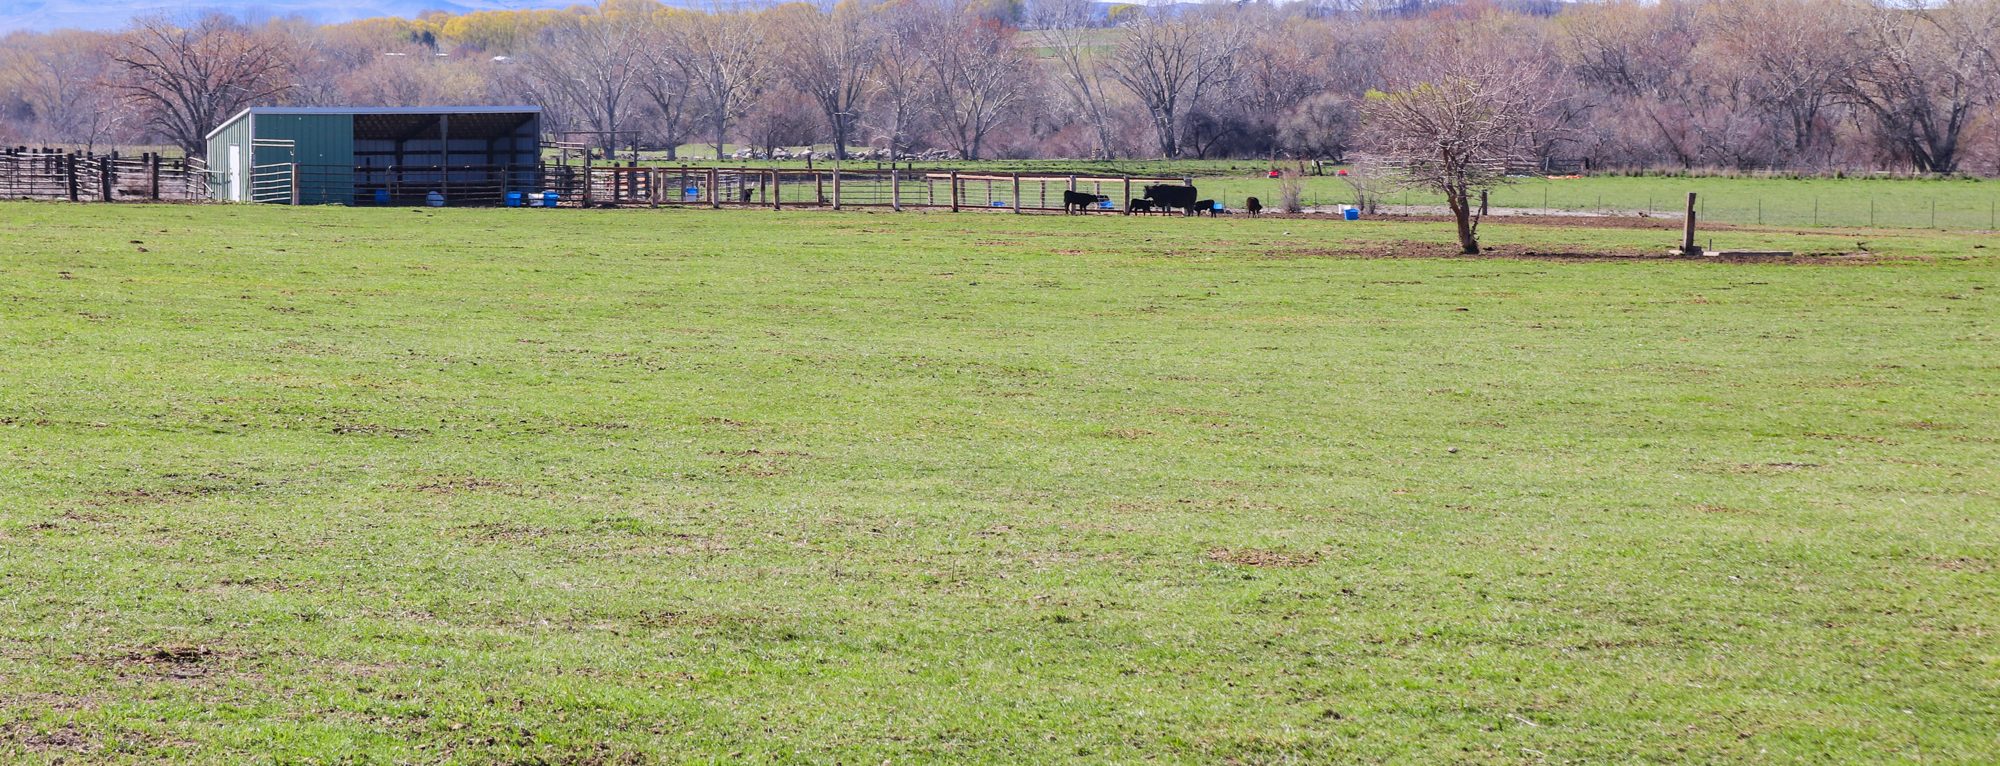 pasture and livestock shelter